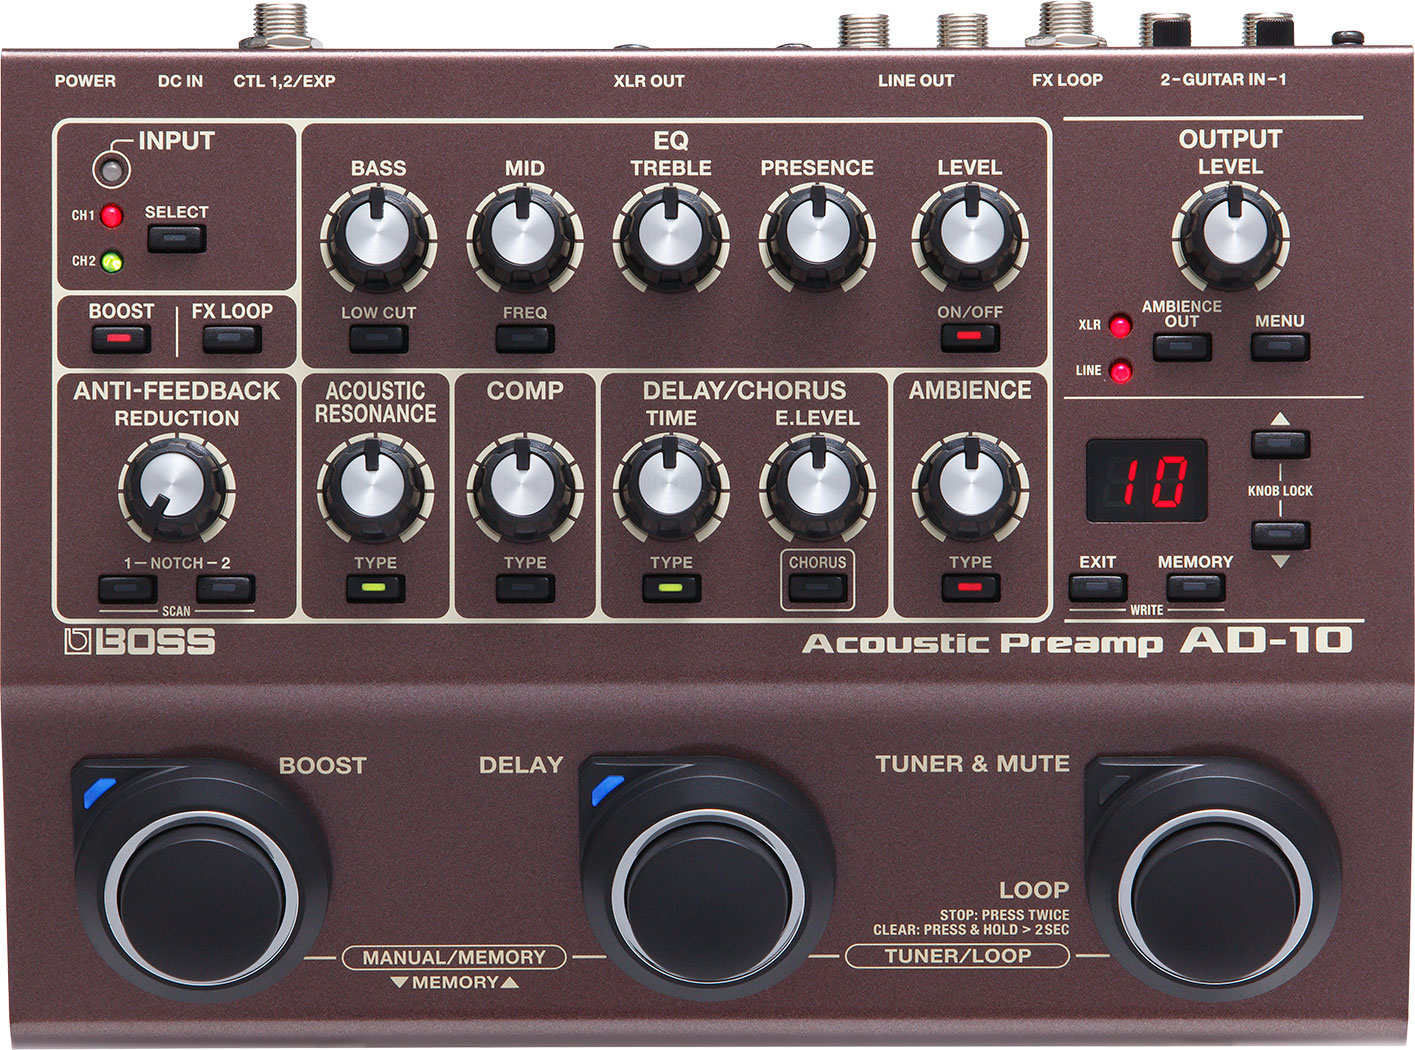 AD-10 | Acoustic Preamp - BOSS